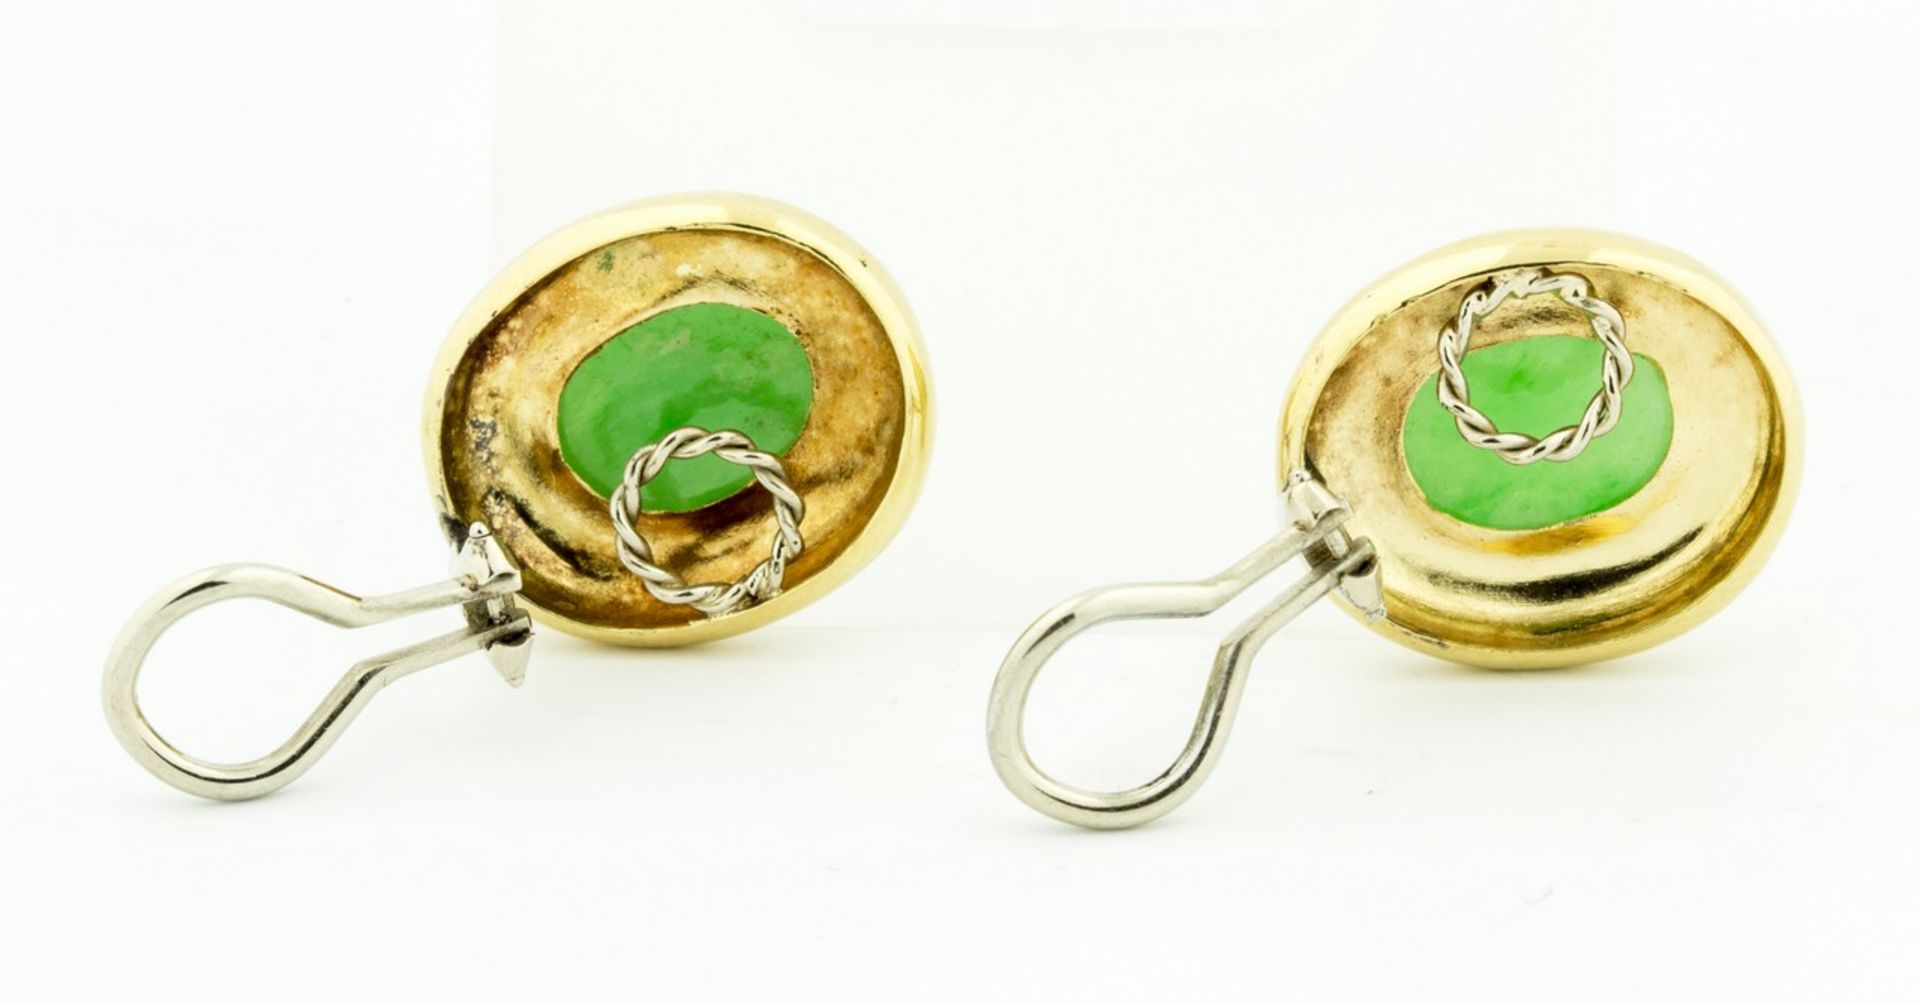 YELLOW GOLD JADE EAR CLIPS Centering an oval cabochon-cut green jade, surrounded by a gold frame, - Image 2 of 2